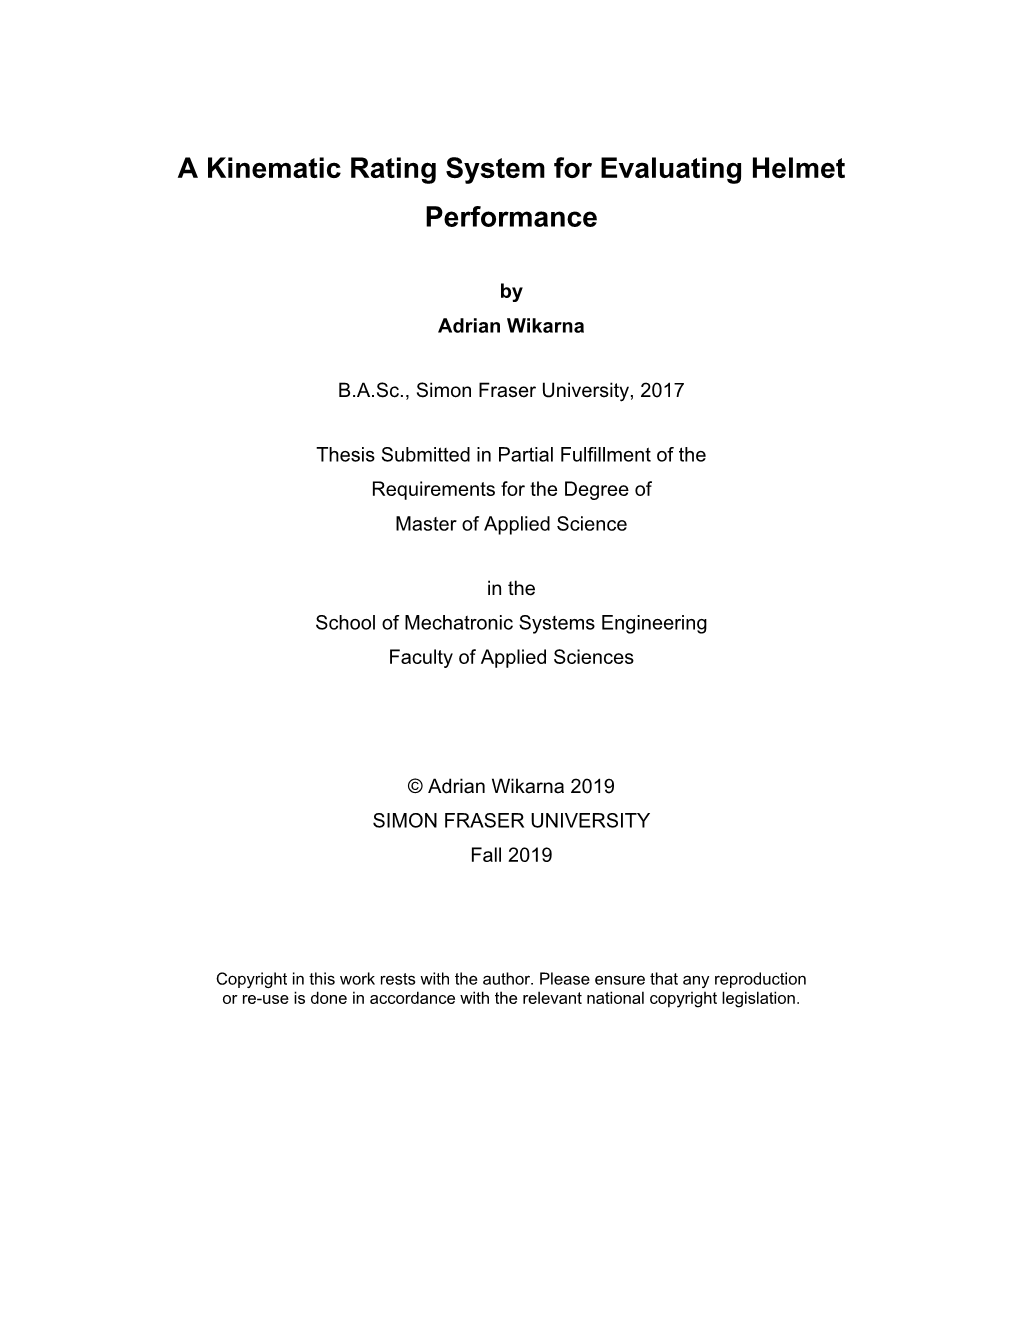 A Kinematic Rating System for Evaluating Helmet Performance